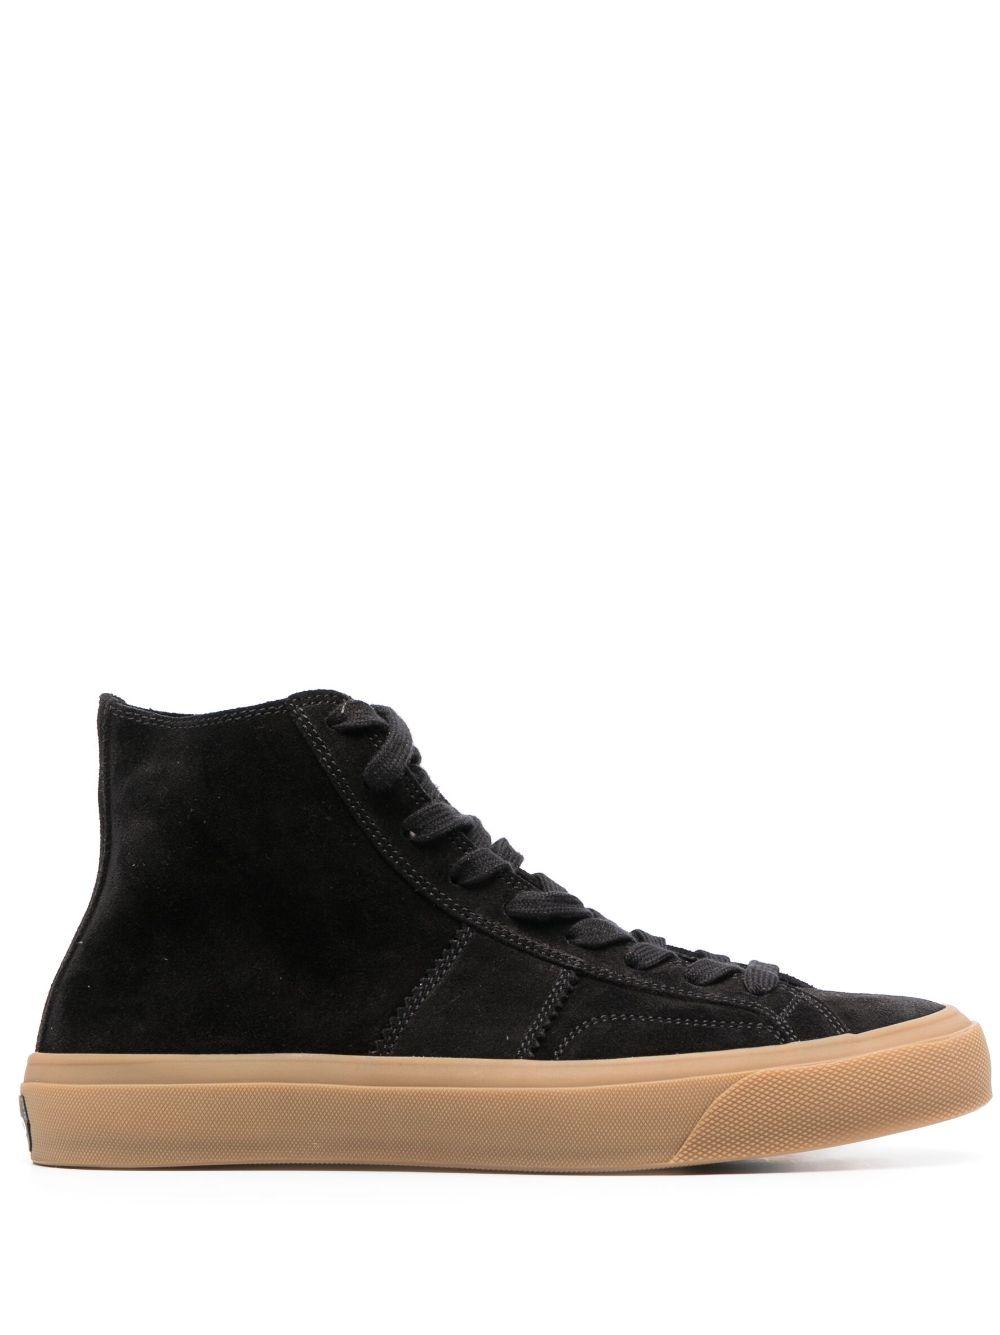 Tom Ford Suede High-top Sneakers in Black for Men | Lyst